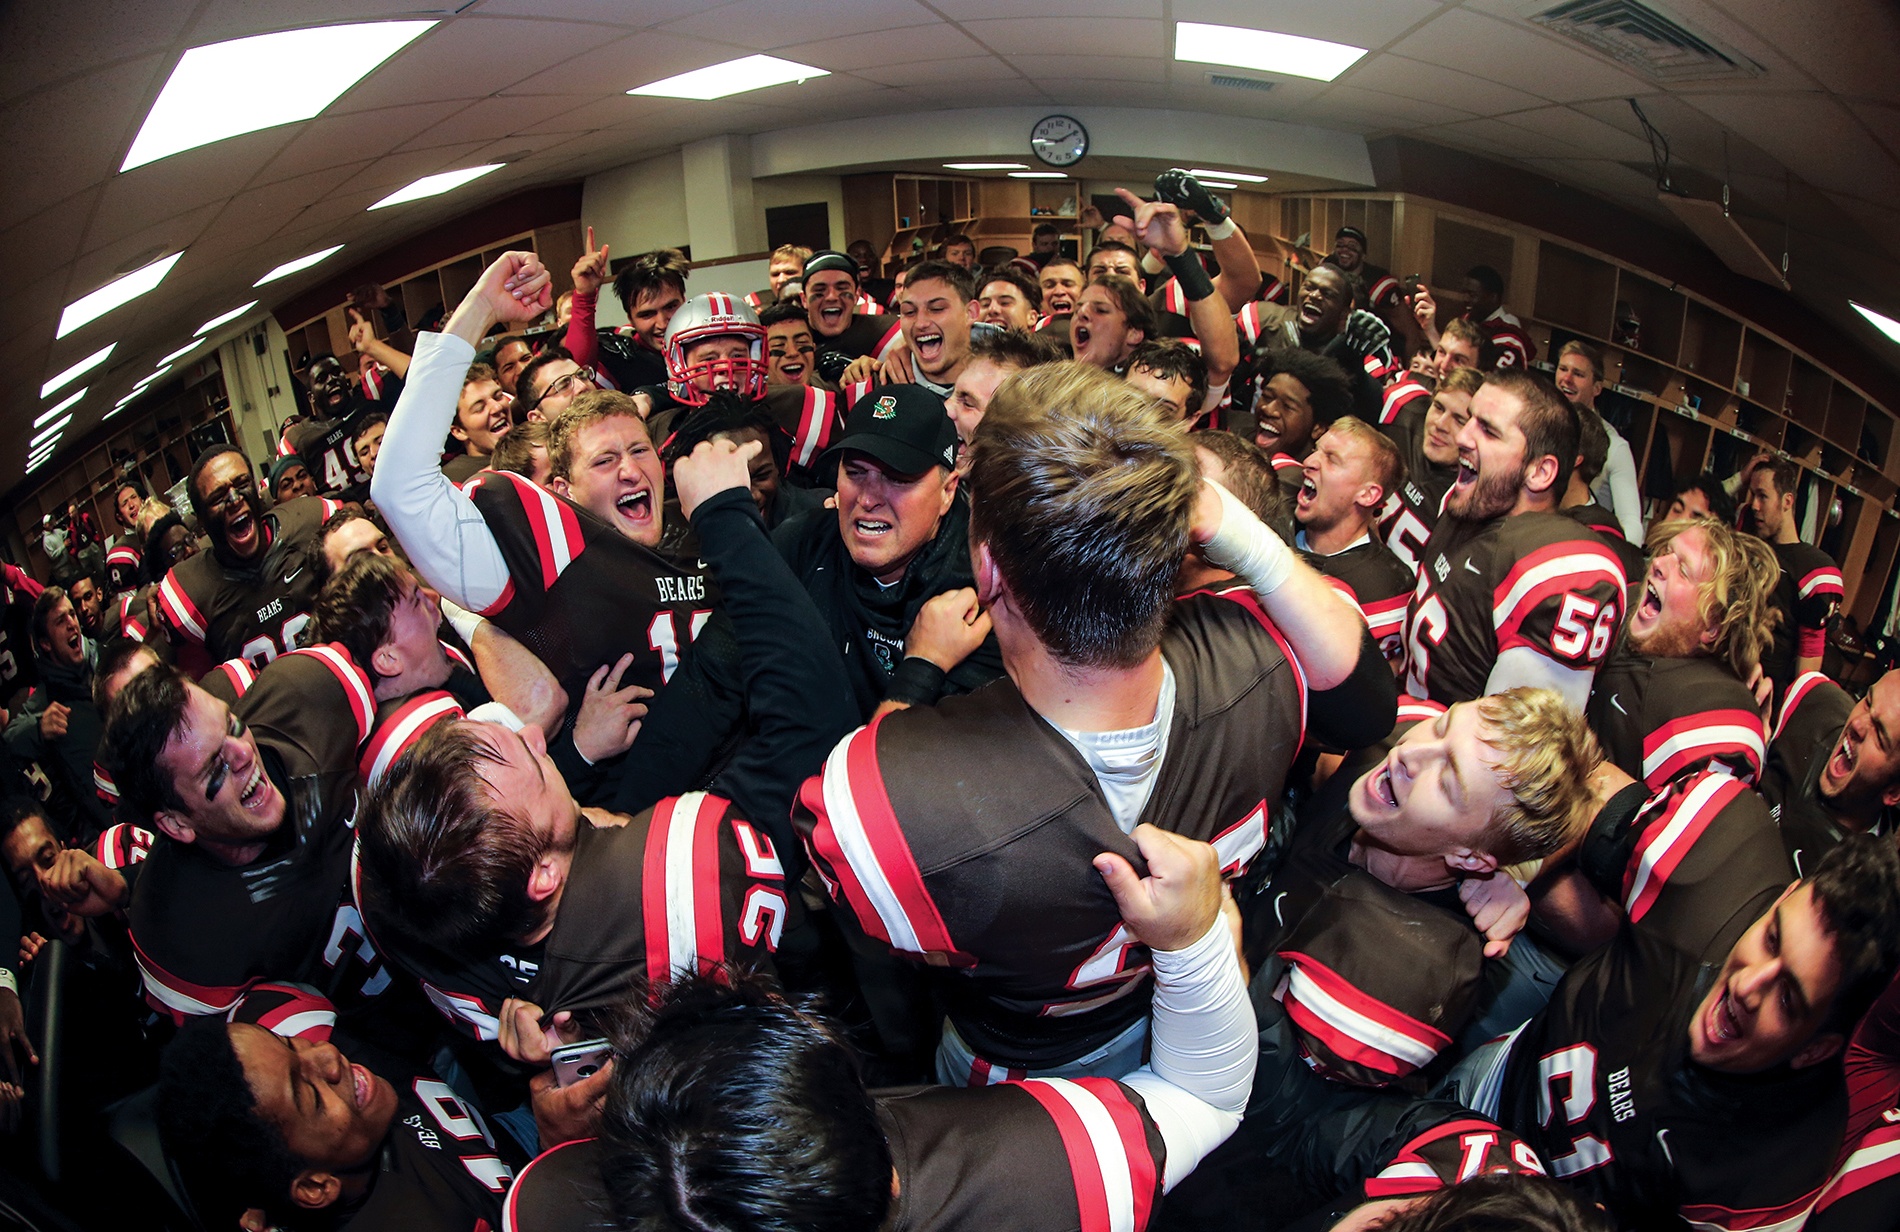 Estes and the Bears celebrate a win over URI at the 2015 Governor’s Cup.